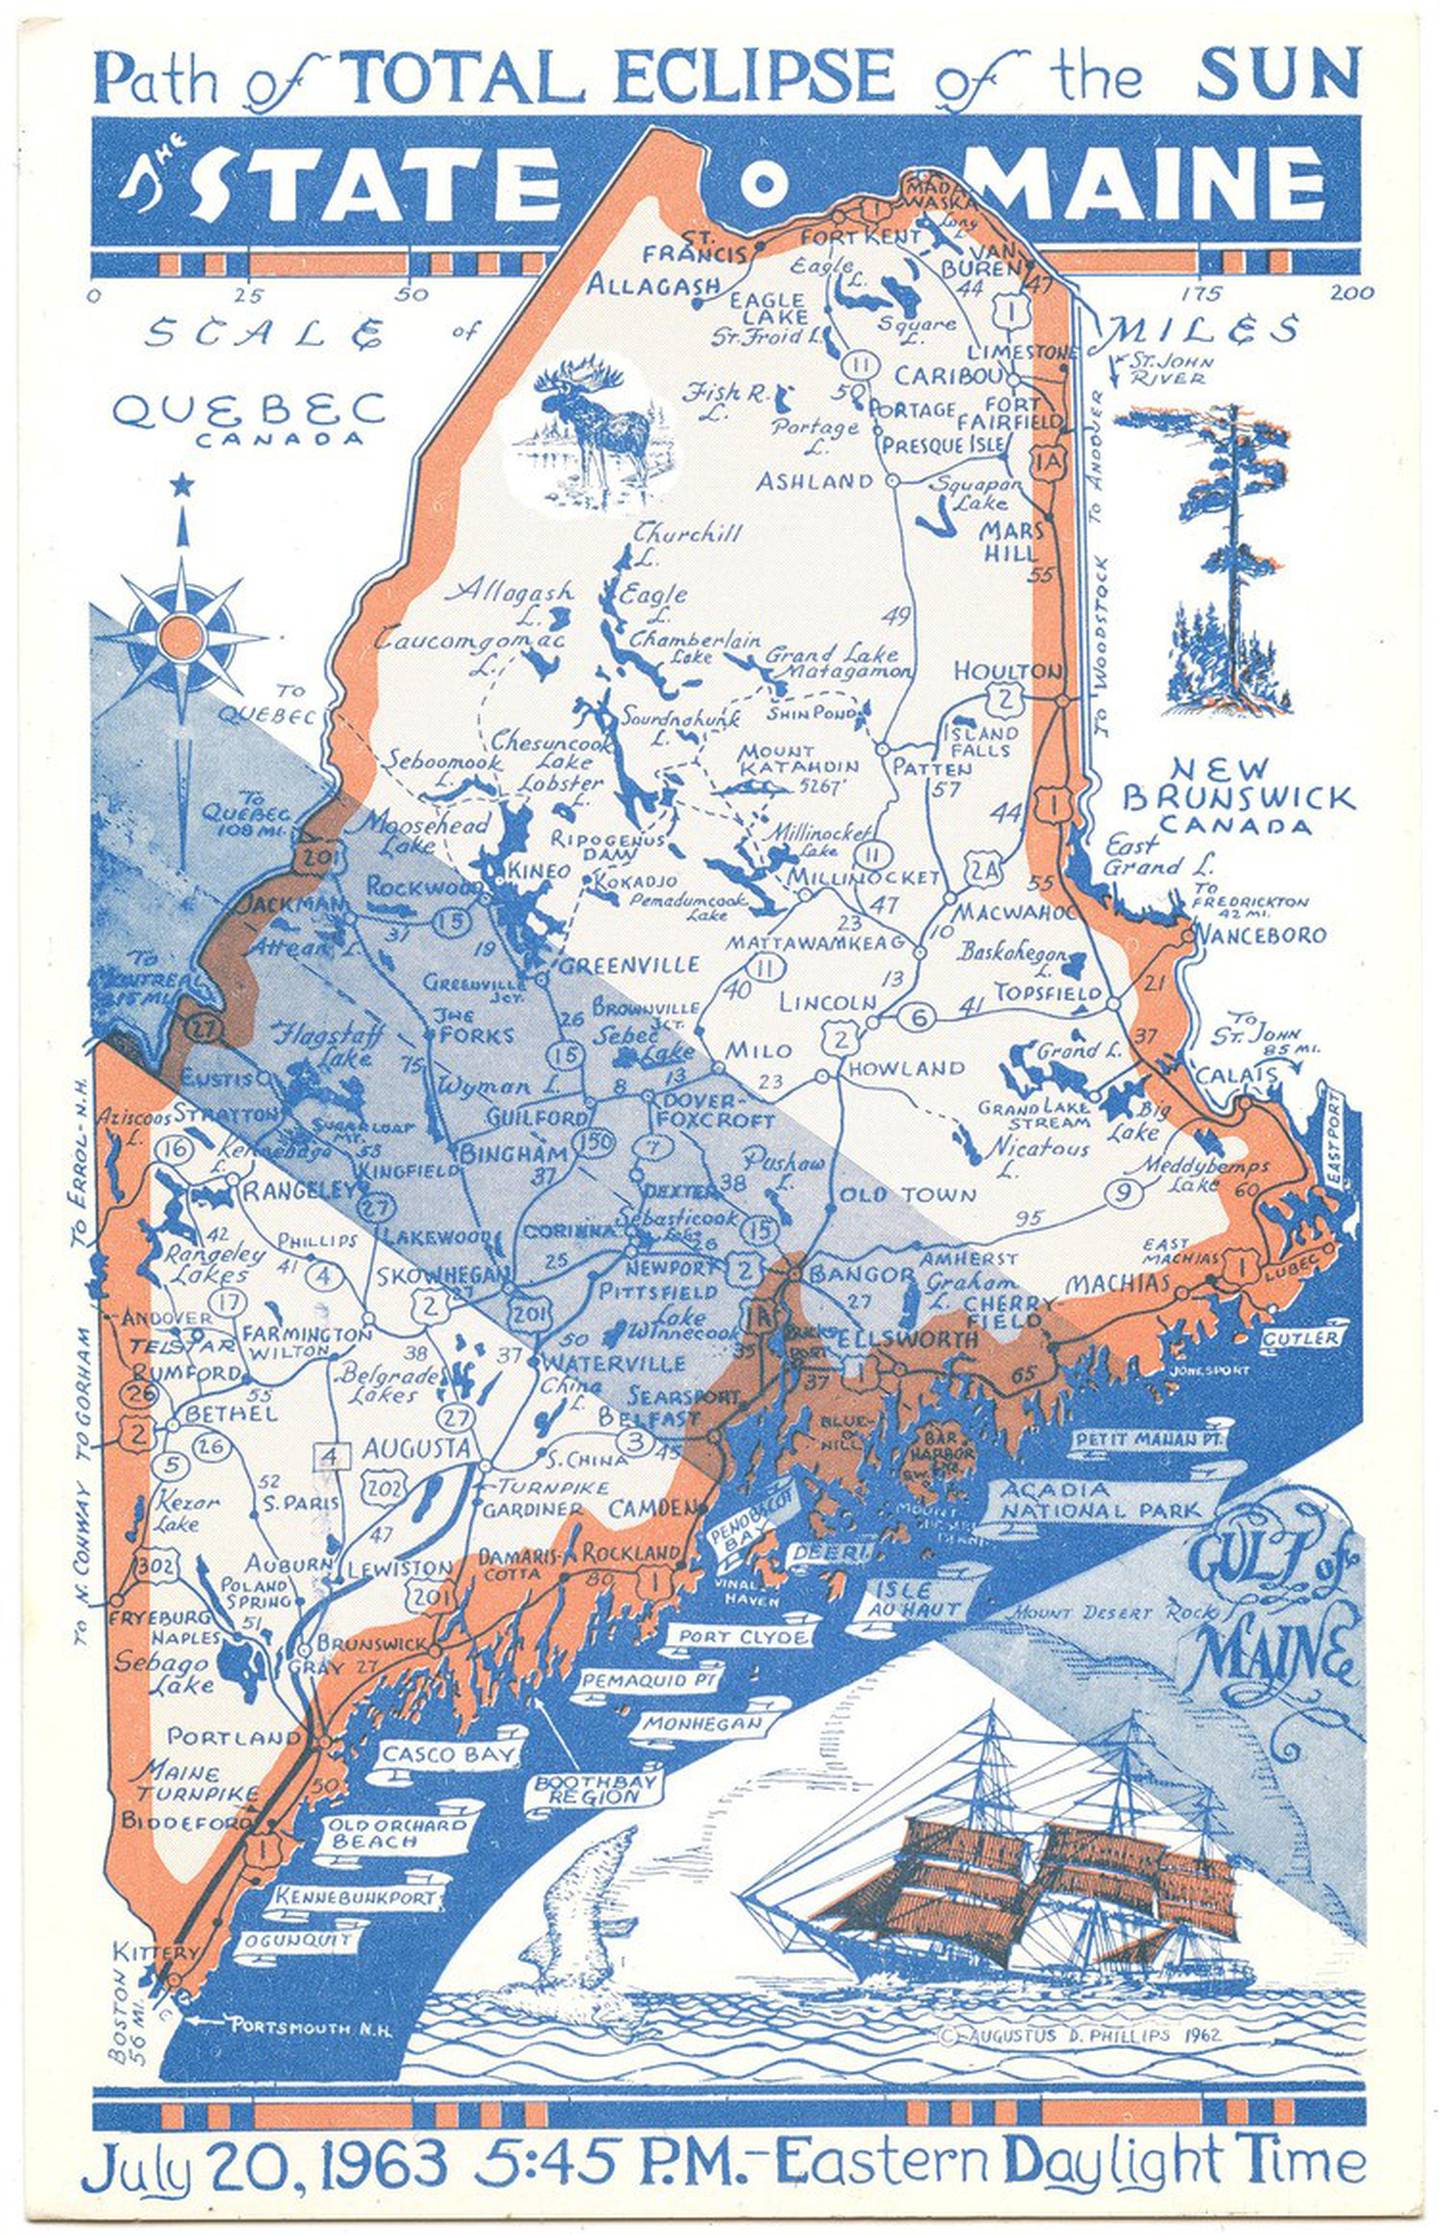 Historic map of Maine’s last total solar eclipse pathway that happened in 1963 and passed over Dover-Foxcroft and Bangor.